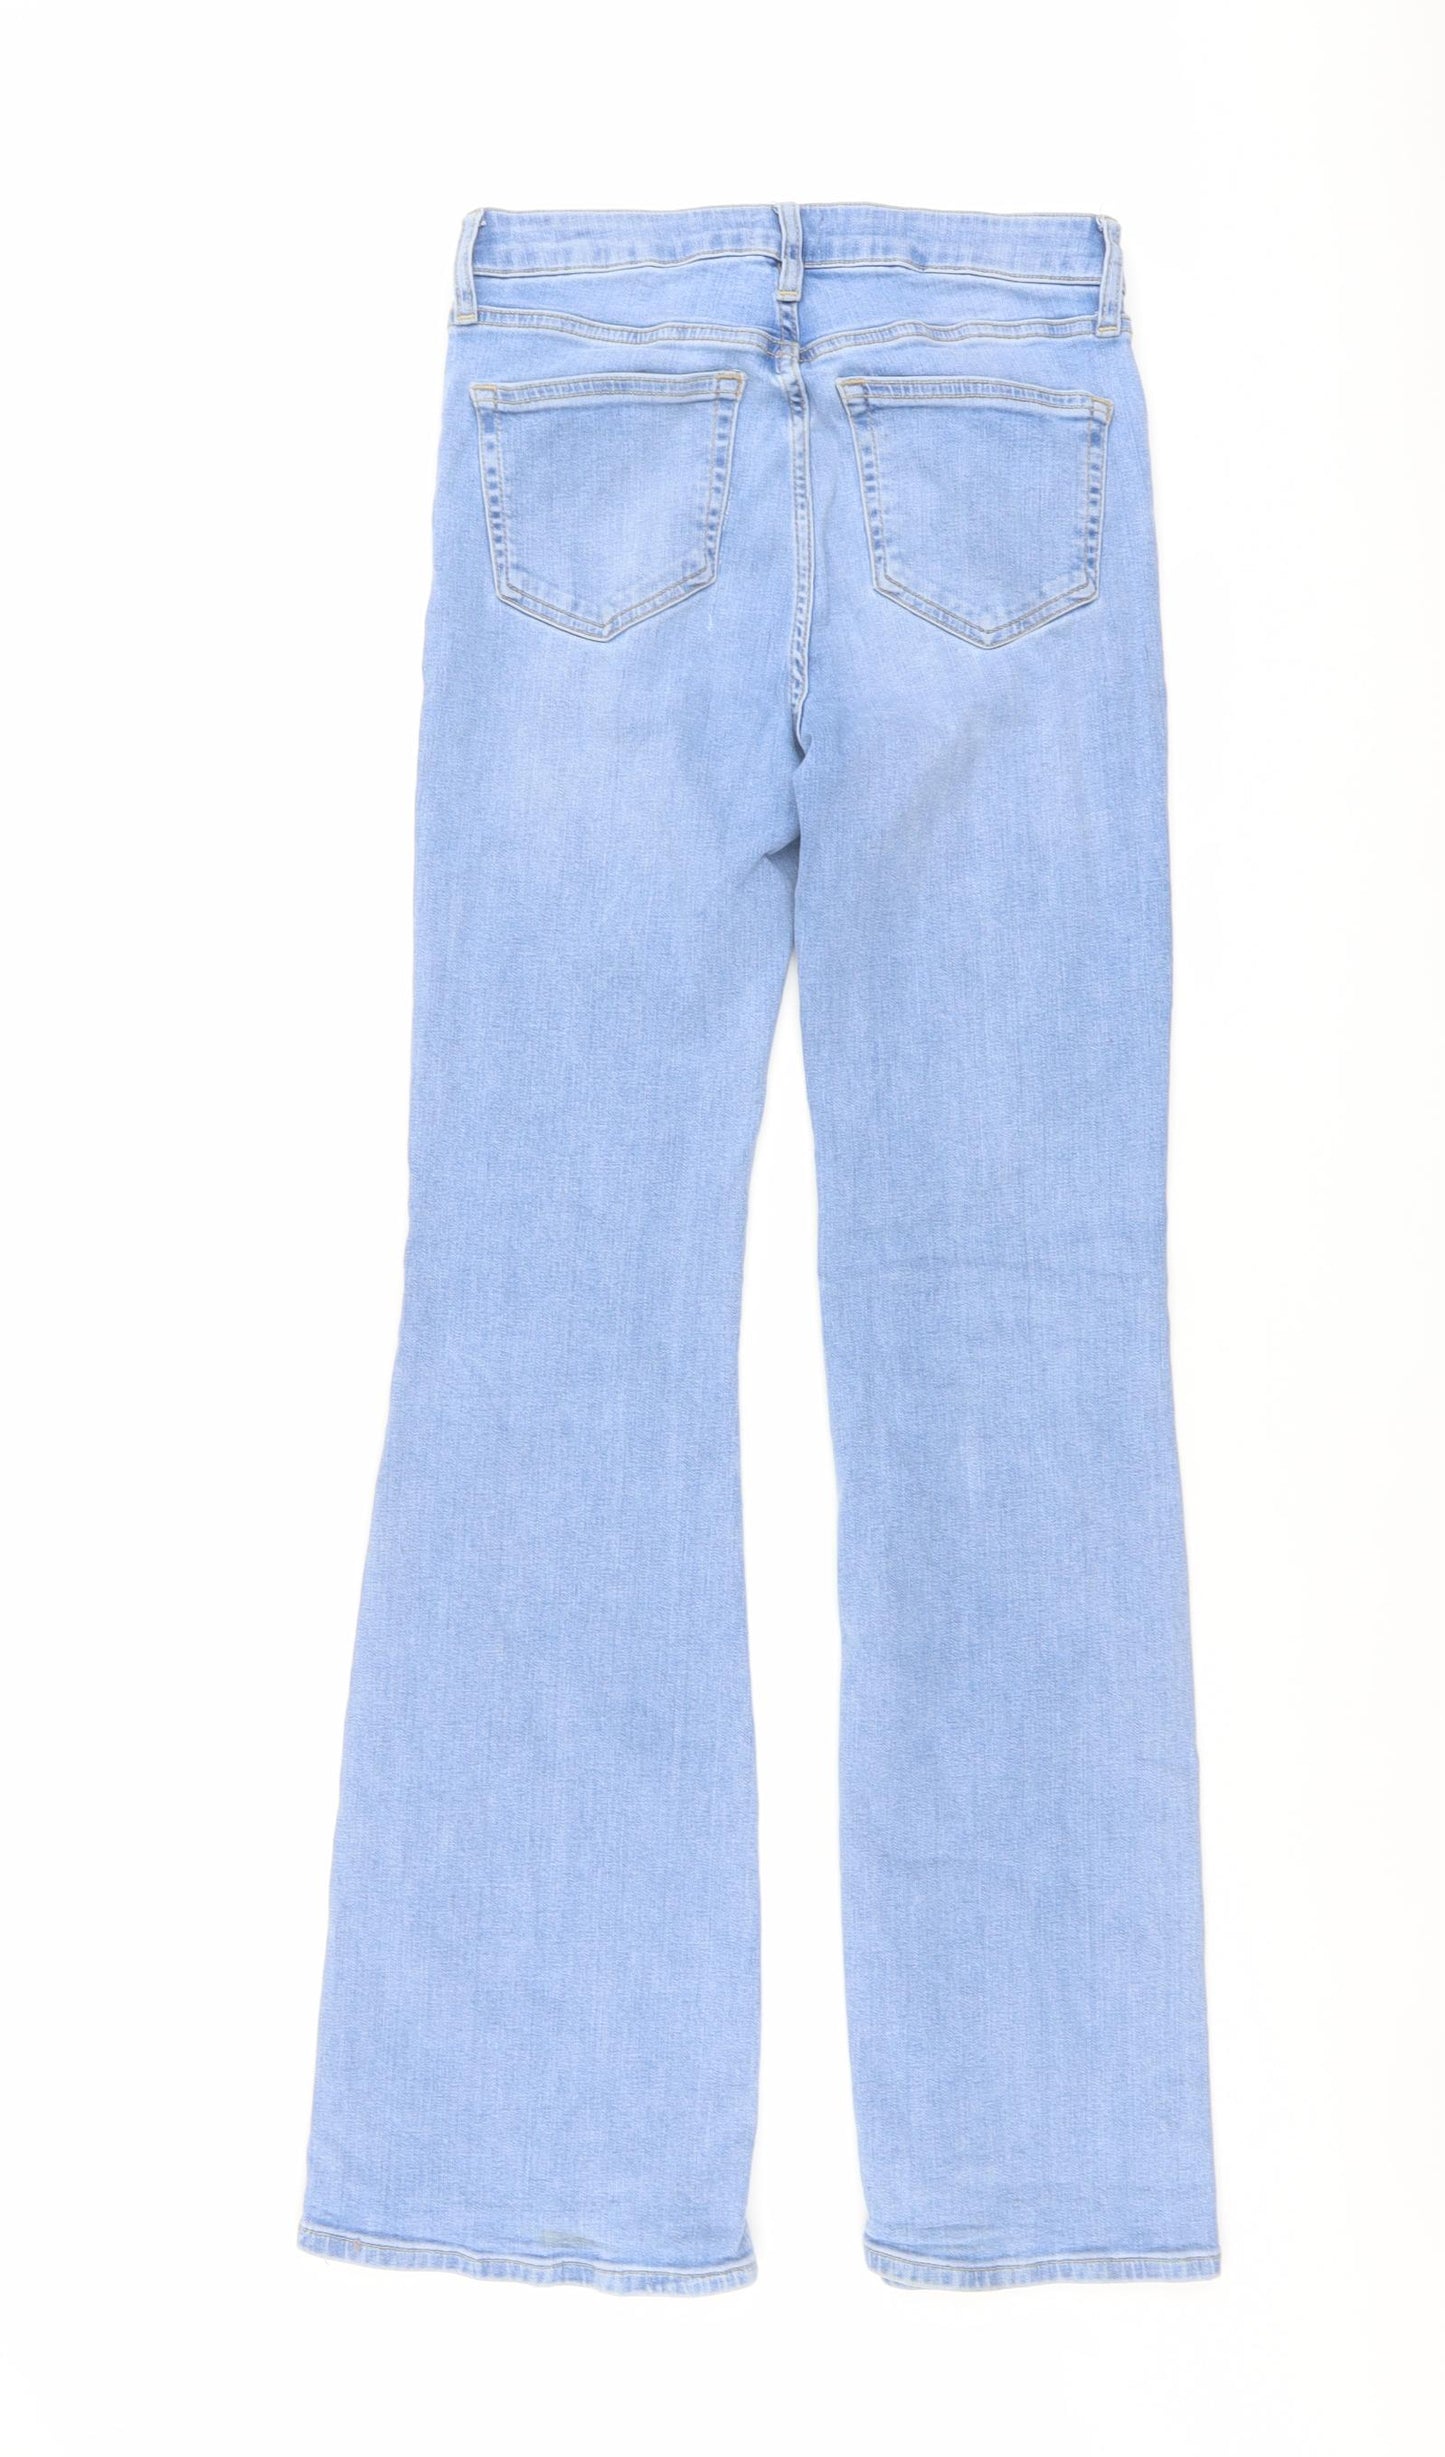 River Island Womens Blue Cotton Flared Jeans Size 10 L32 in Regular Button